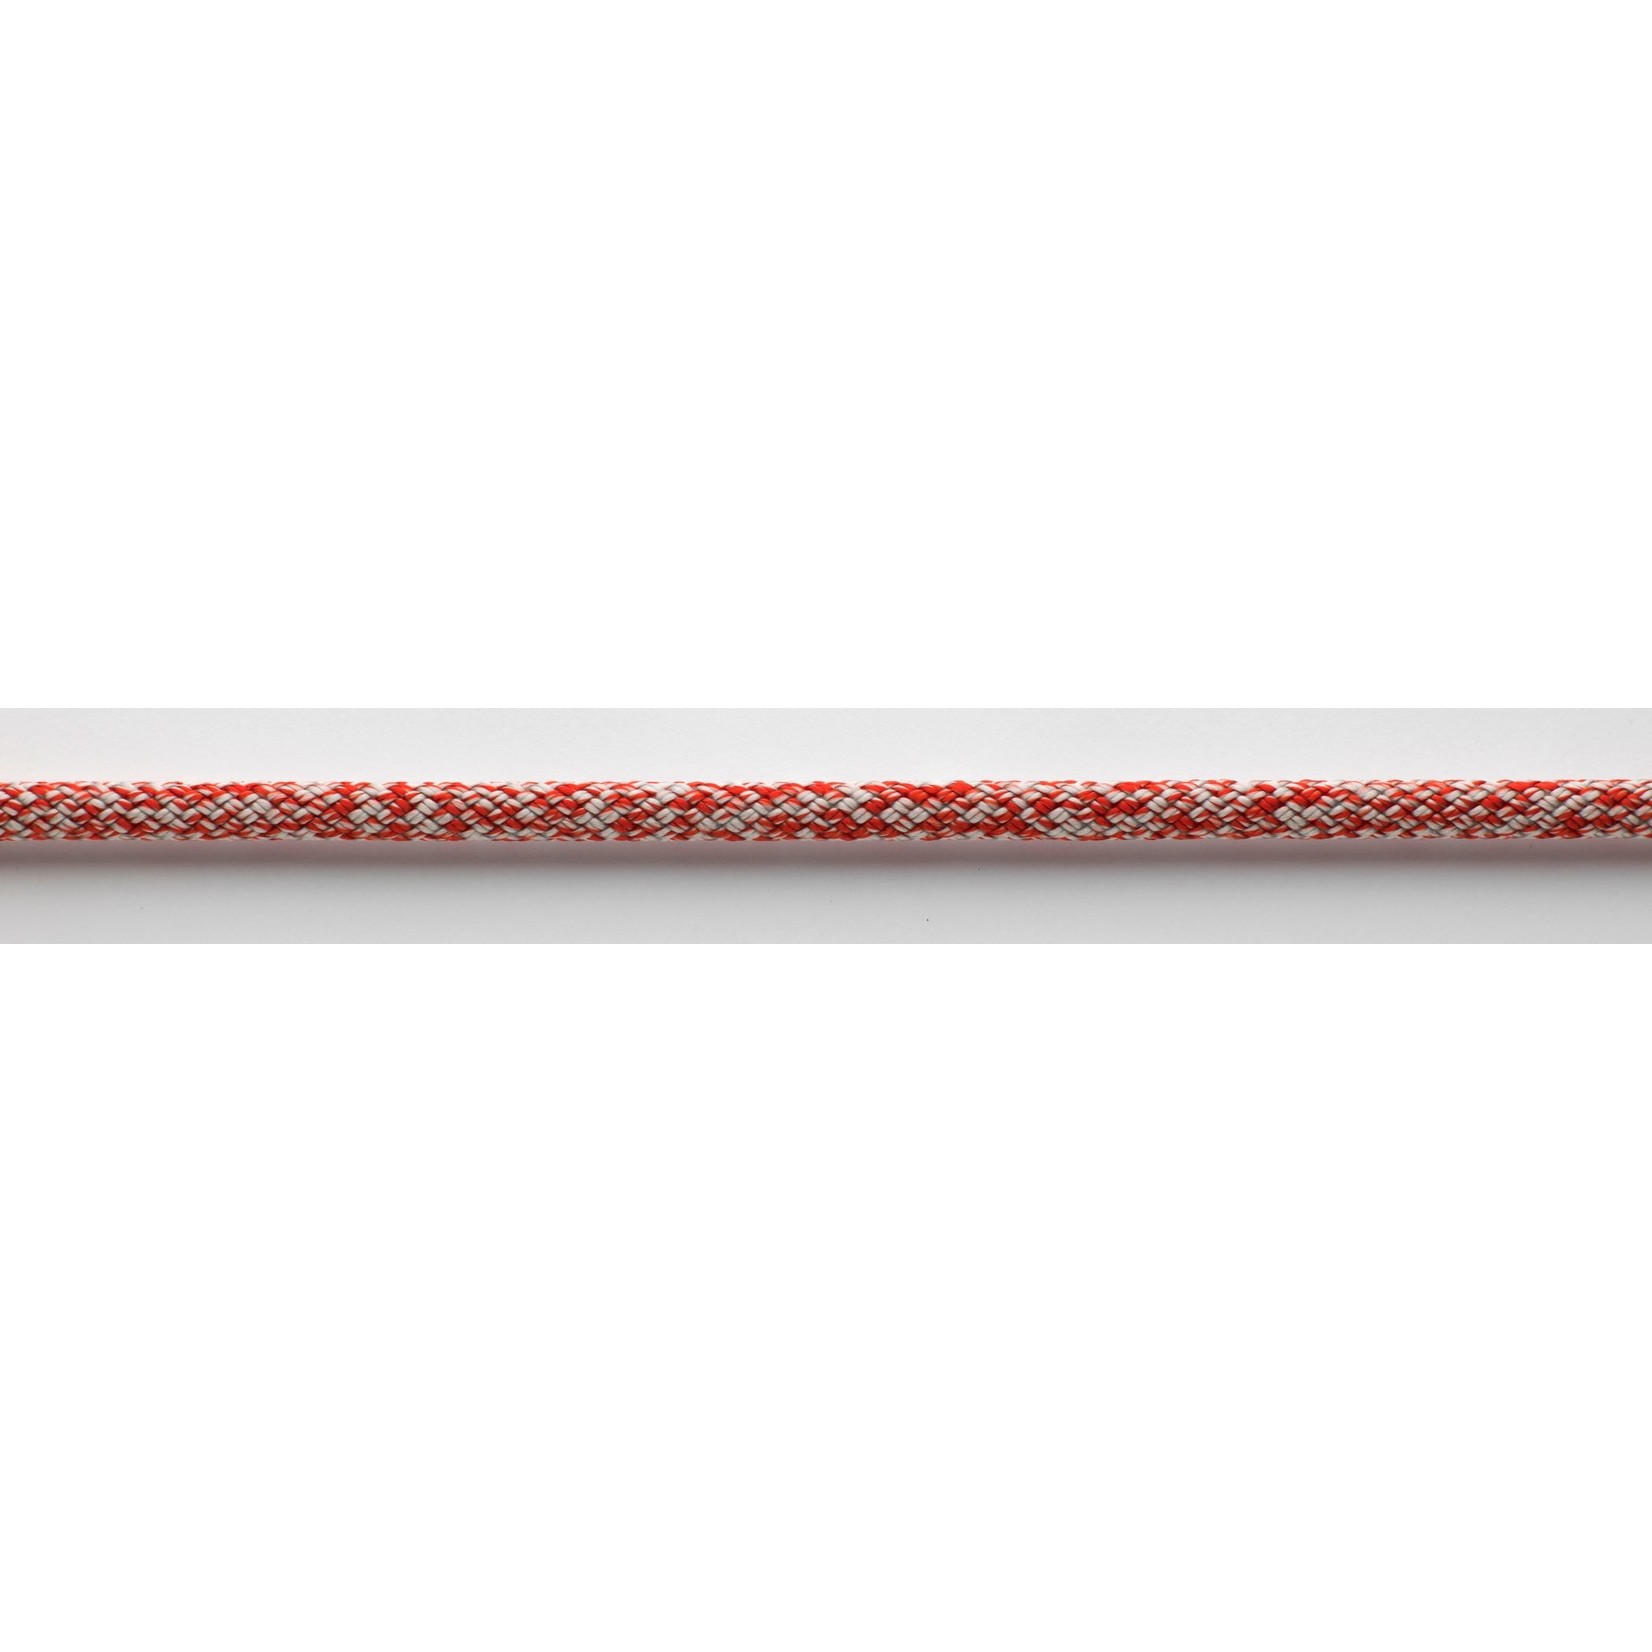 U-Rope Offshore 12mm. red